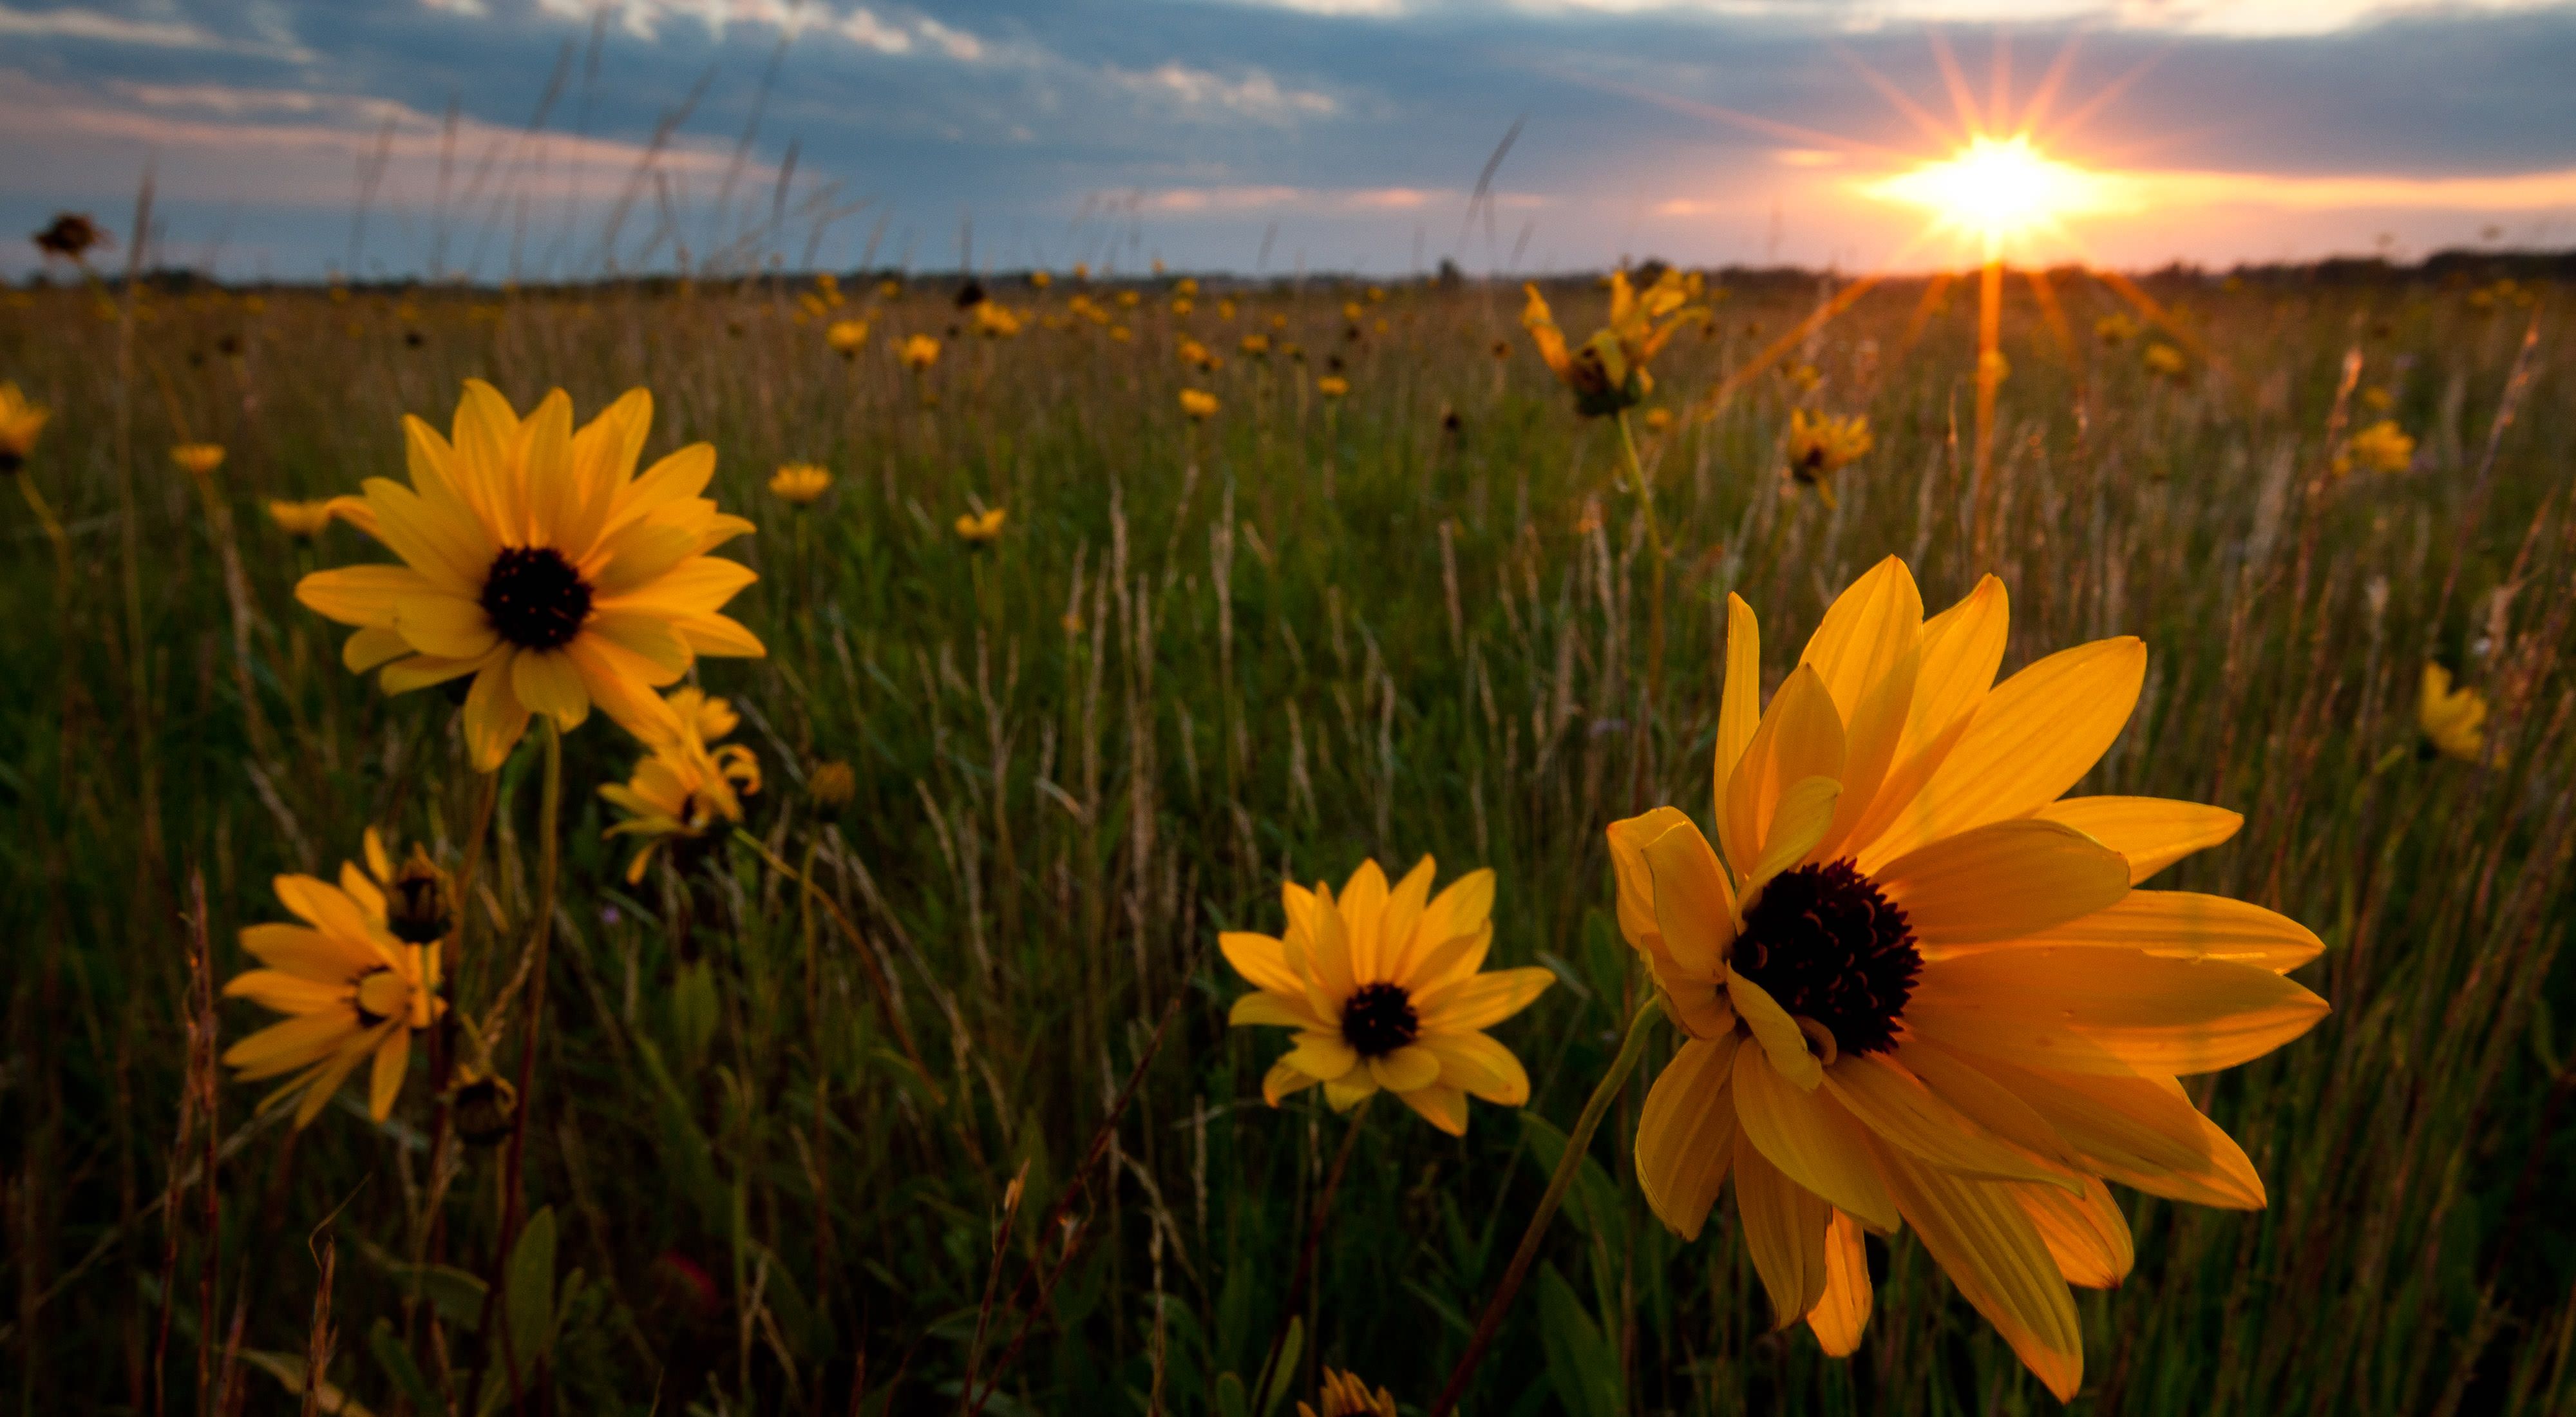 The sun sets behind a field of wildflowers.